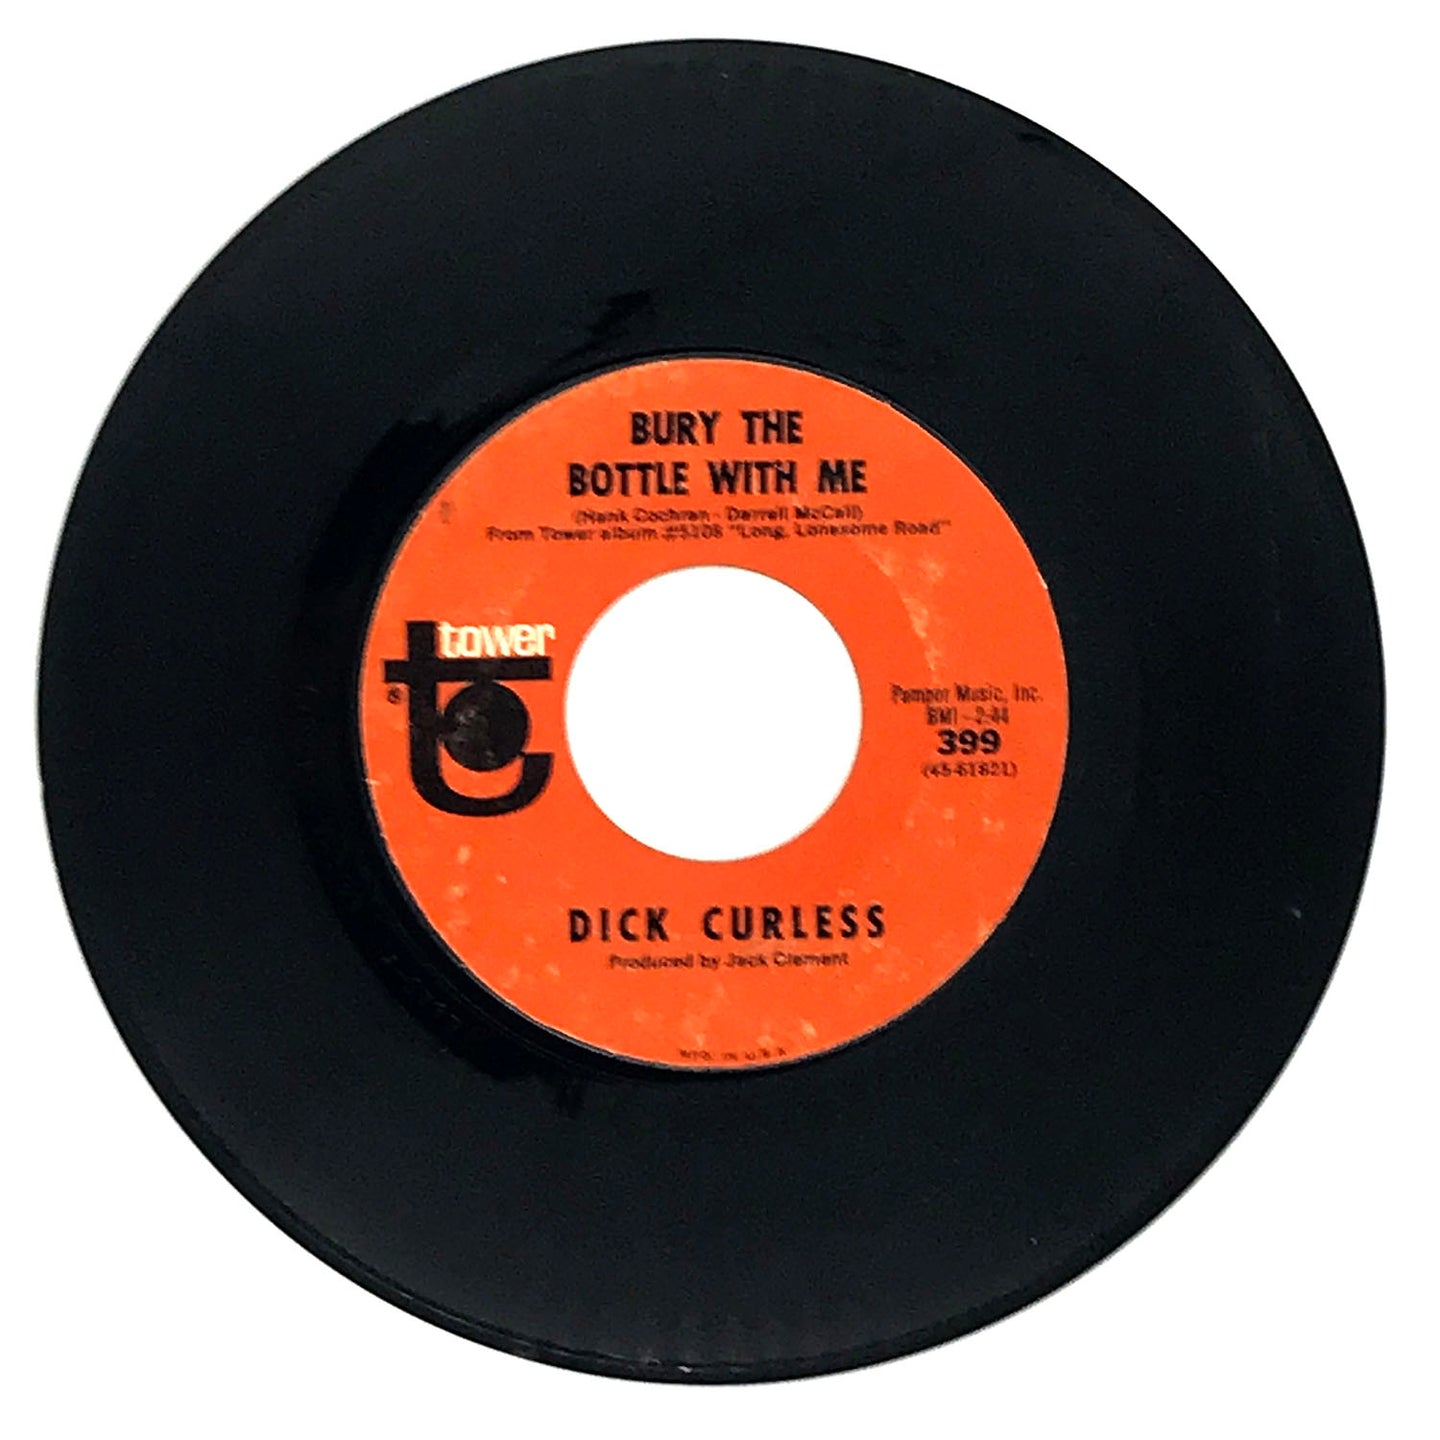 Dick Curless : BURY THE BOTTLE WITH ME/ BUMMIN' ON TRACK 